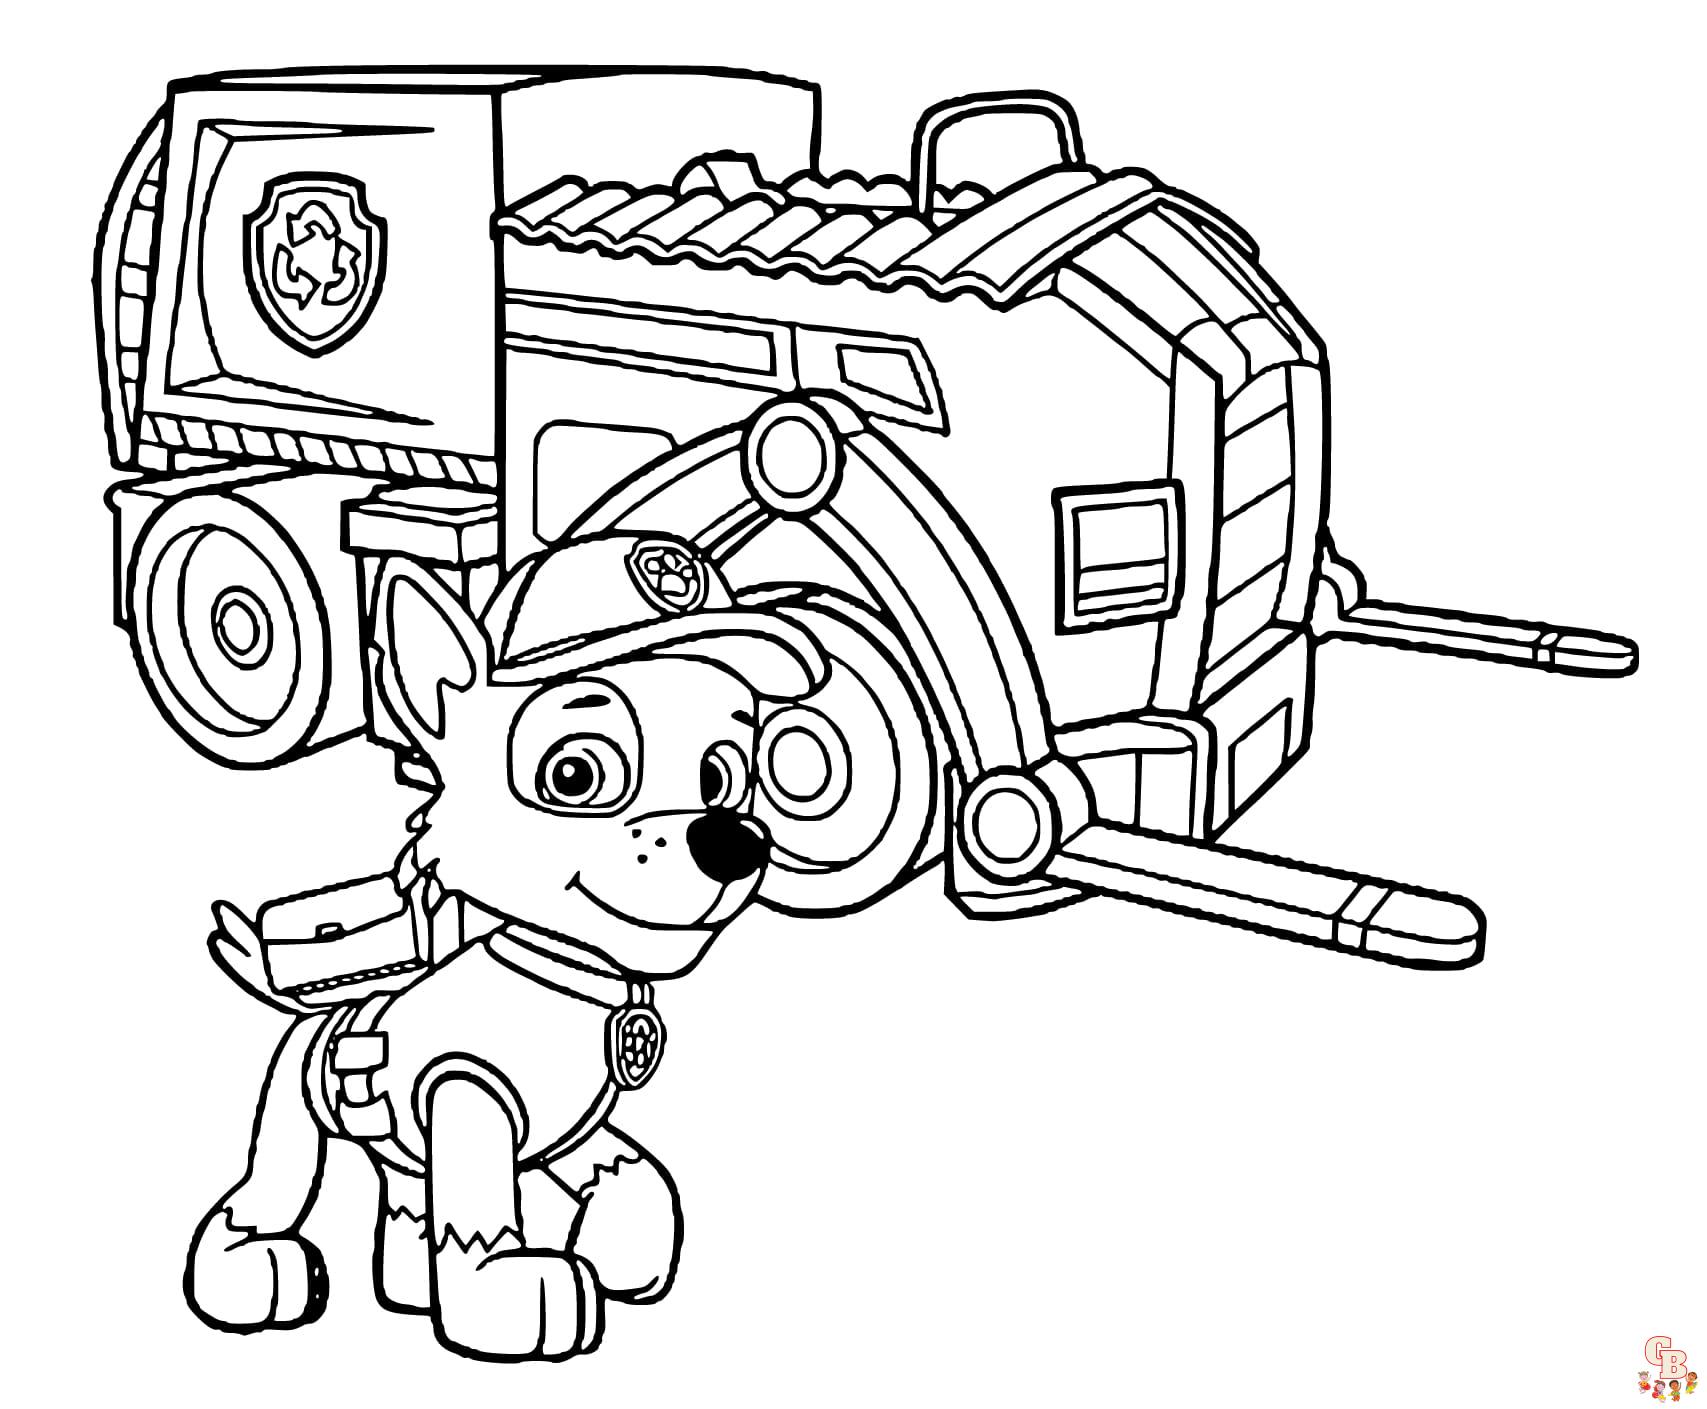 Paw Patrol coloring pages